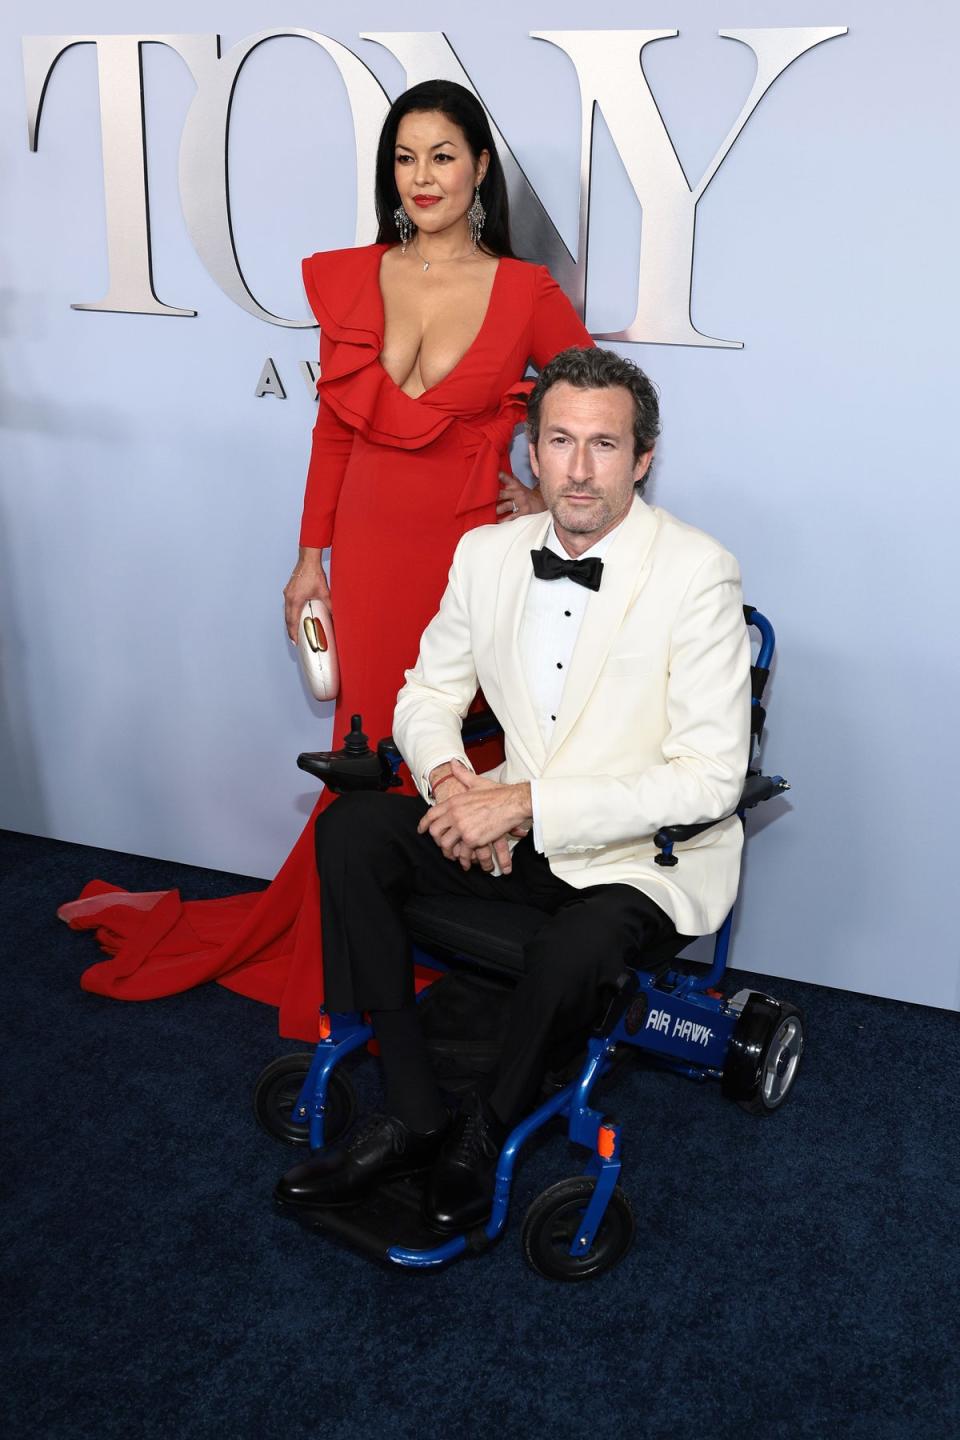 ‘I don’t believe it’s terminal. I believe I’m going to beat it,’ Aaron Lazar said of his ALS diagnosis in January (Getty Images for Tony Awards Productions)